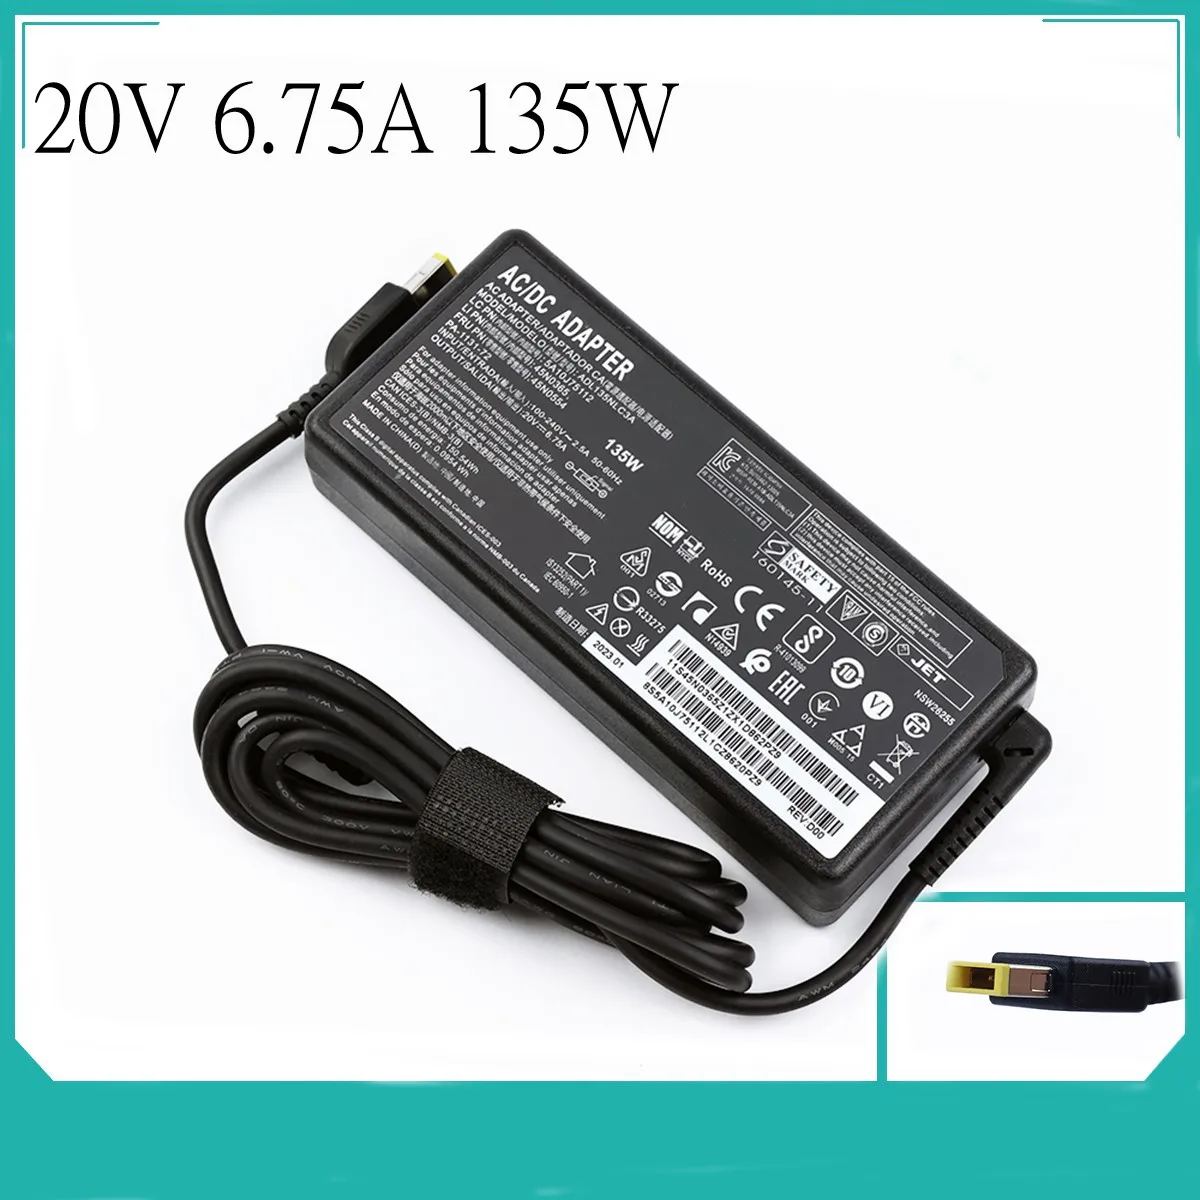 135W 20V 6.75A Laptop AC Adapter Charger for Lenovo IdeaPad Y50 ADL135NDC3A 36200605 45N0361 45N0501 Y50-70-40 t540p